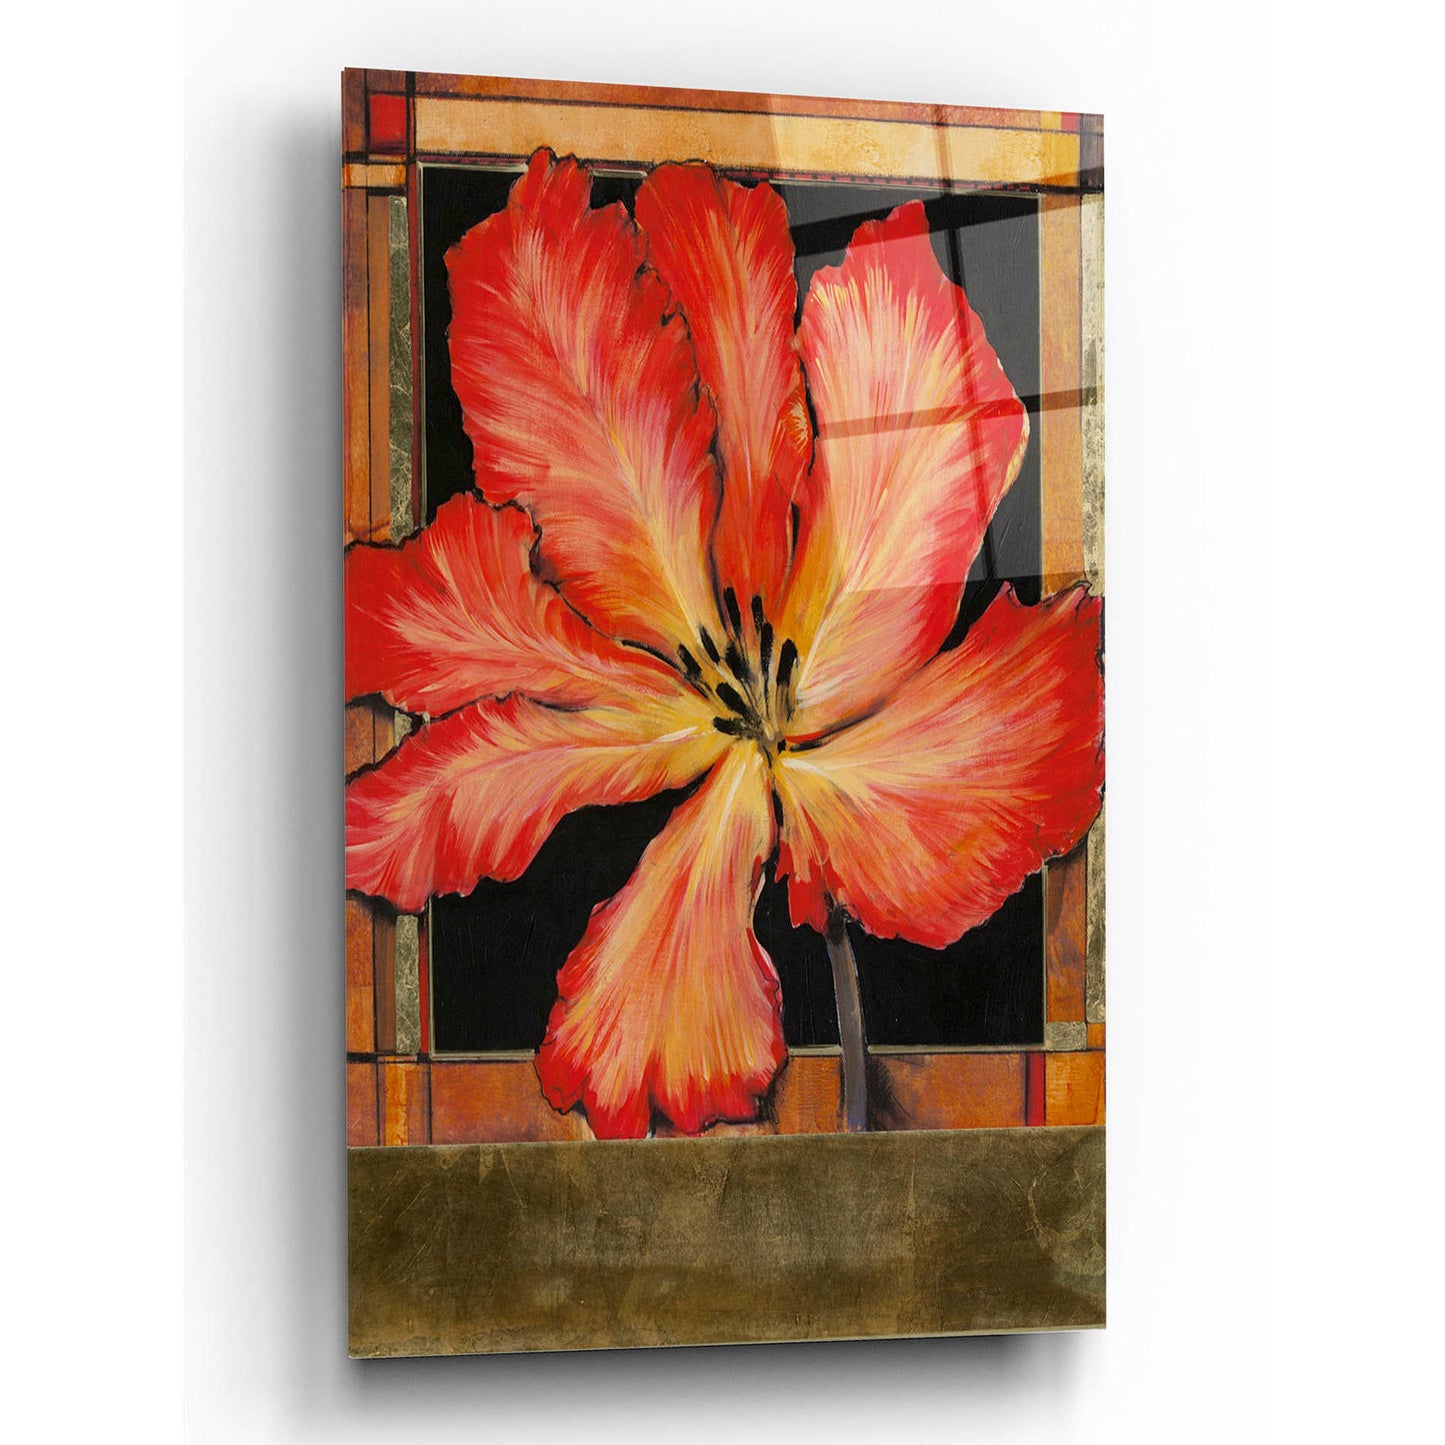 Epic Art 'Embellished Parrot Tulip I' by Tim O'Toole, Acrylic Glass Wall Art,12x16